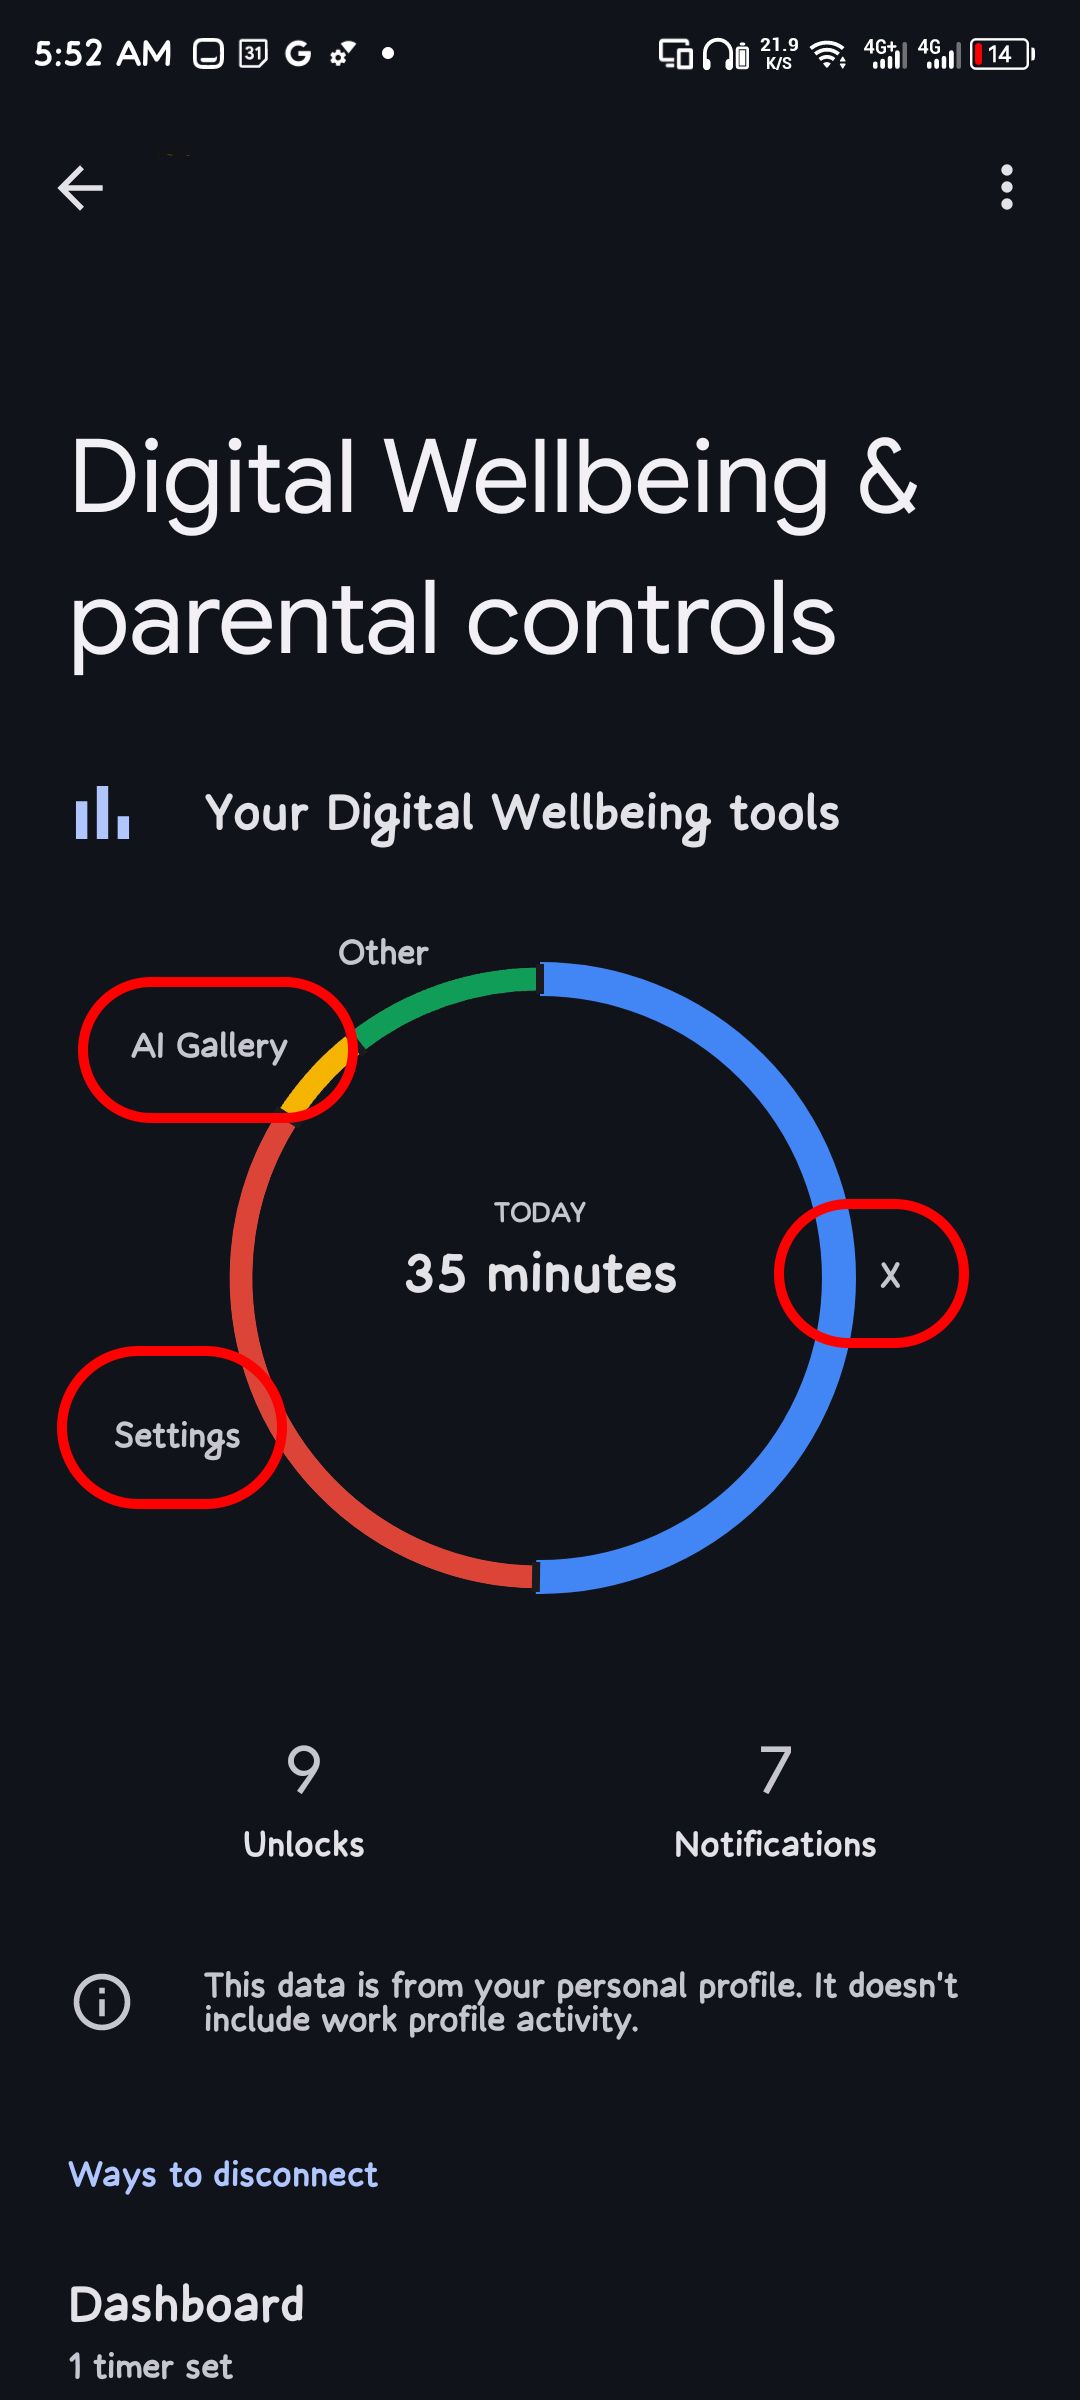 A screenshot showing Google's Digital Wellbeing main page